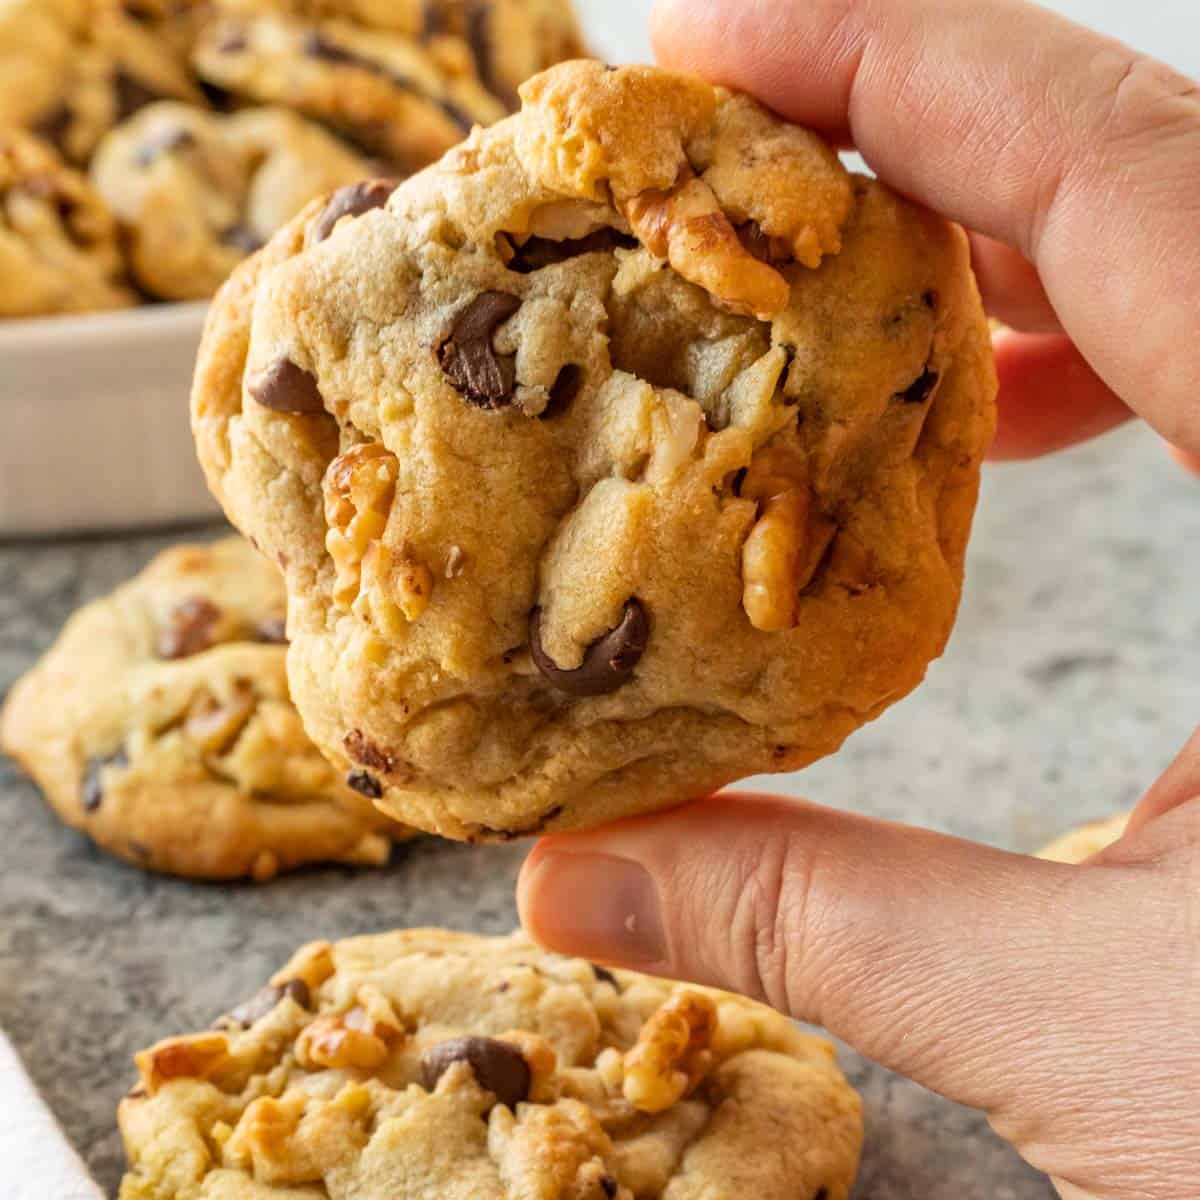 walnut chocolate chip cookie being held featured image